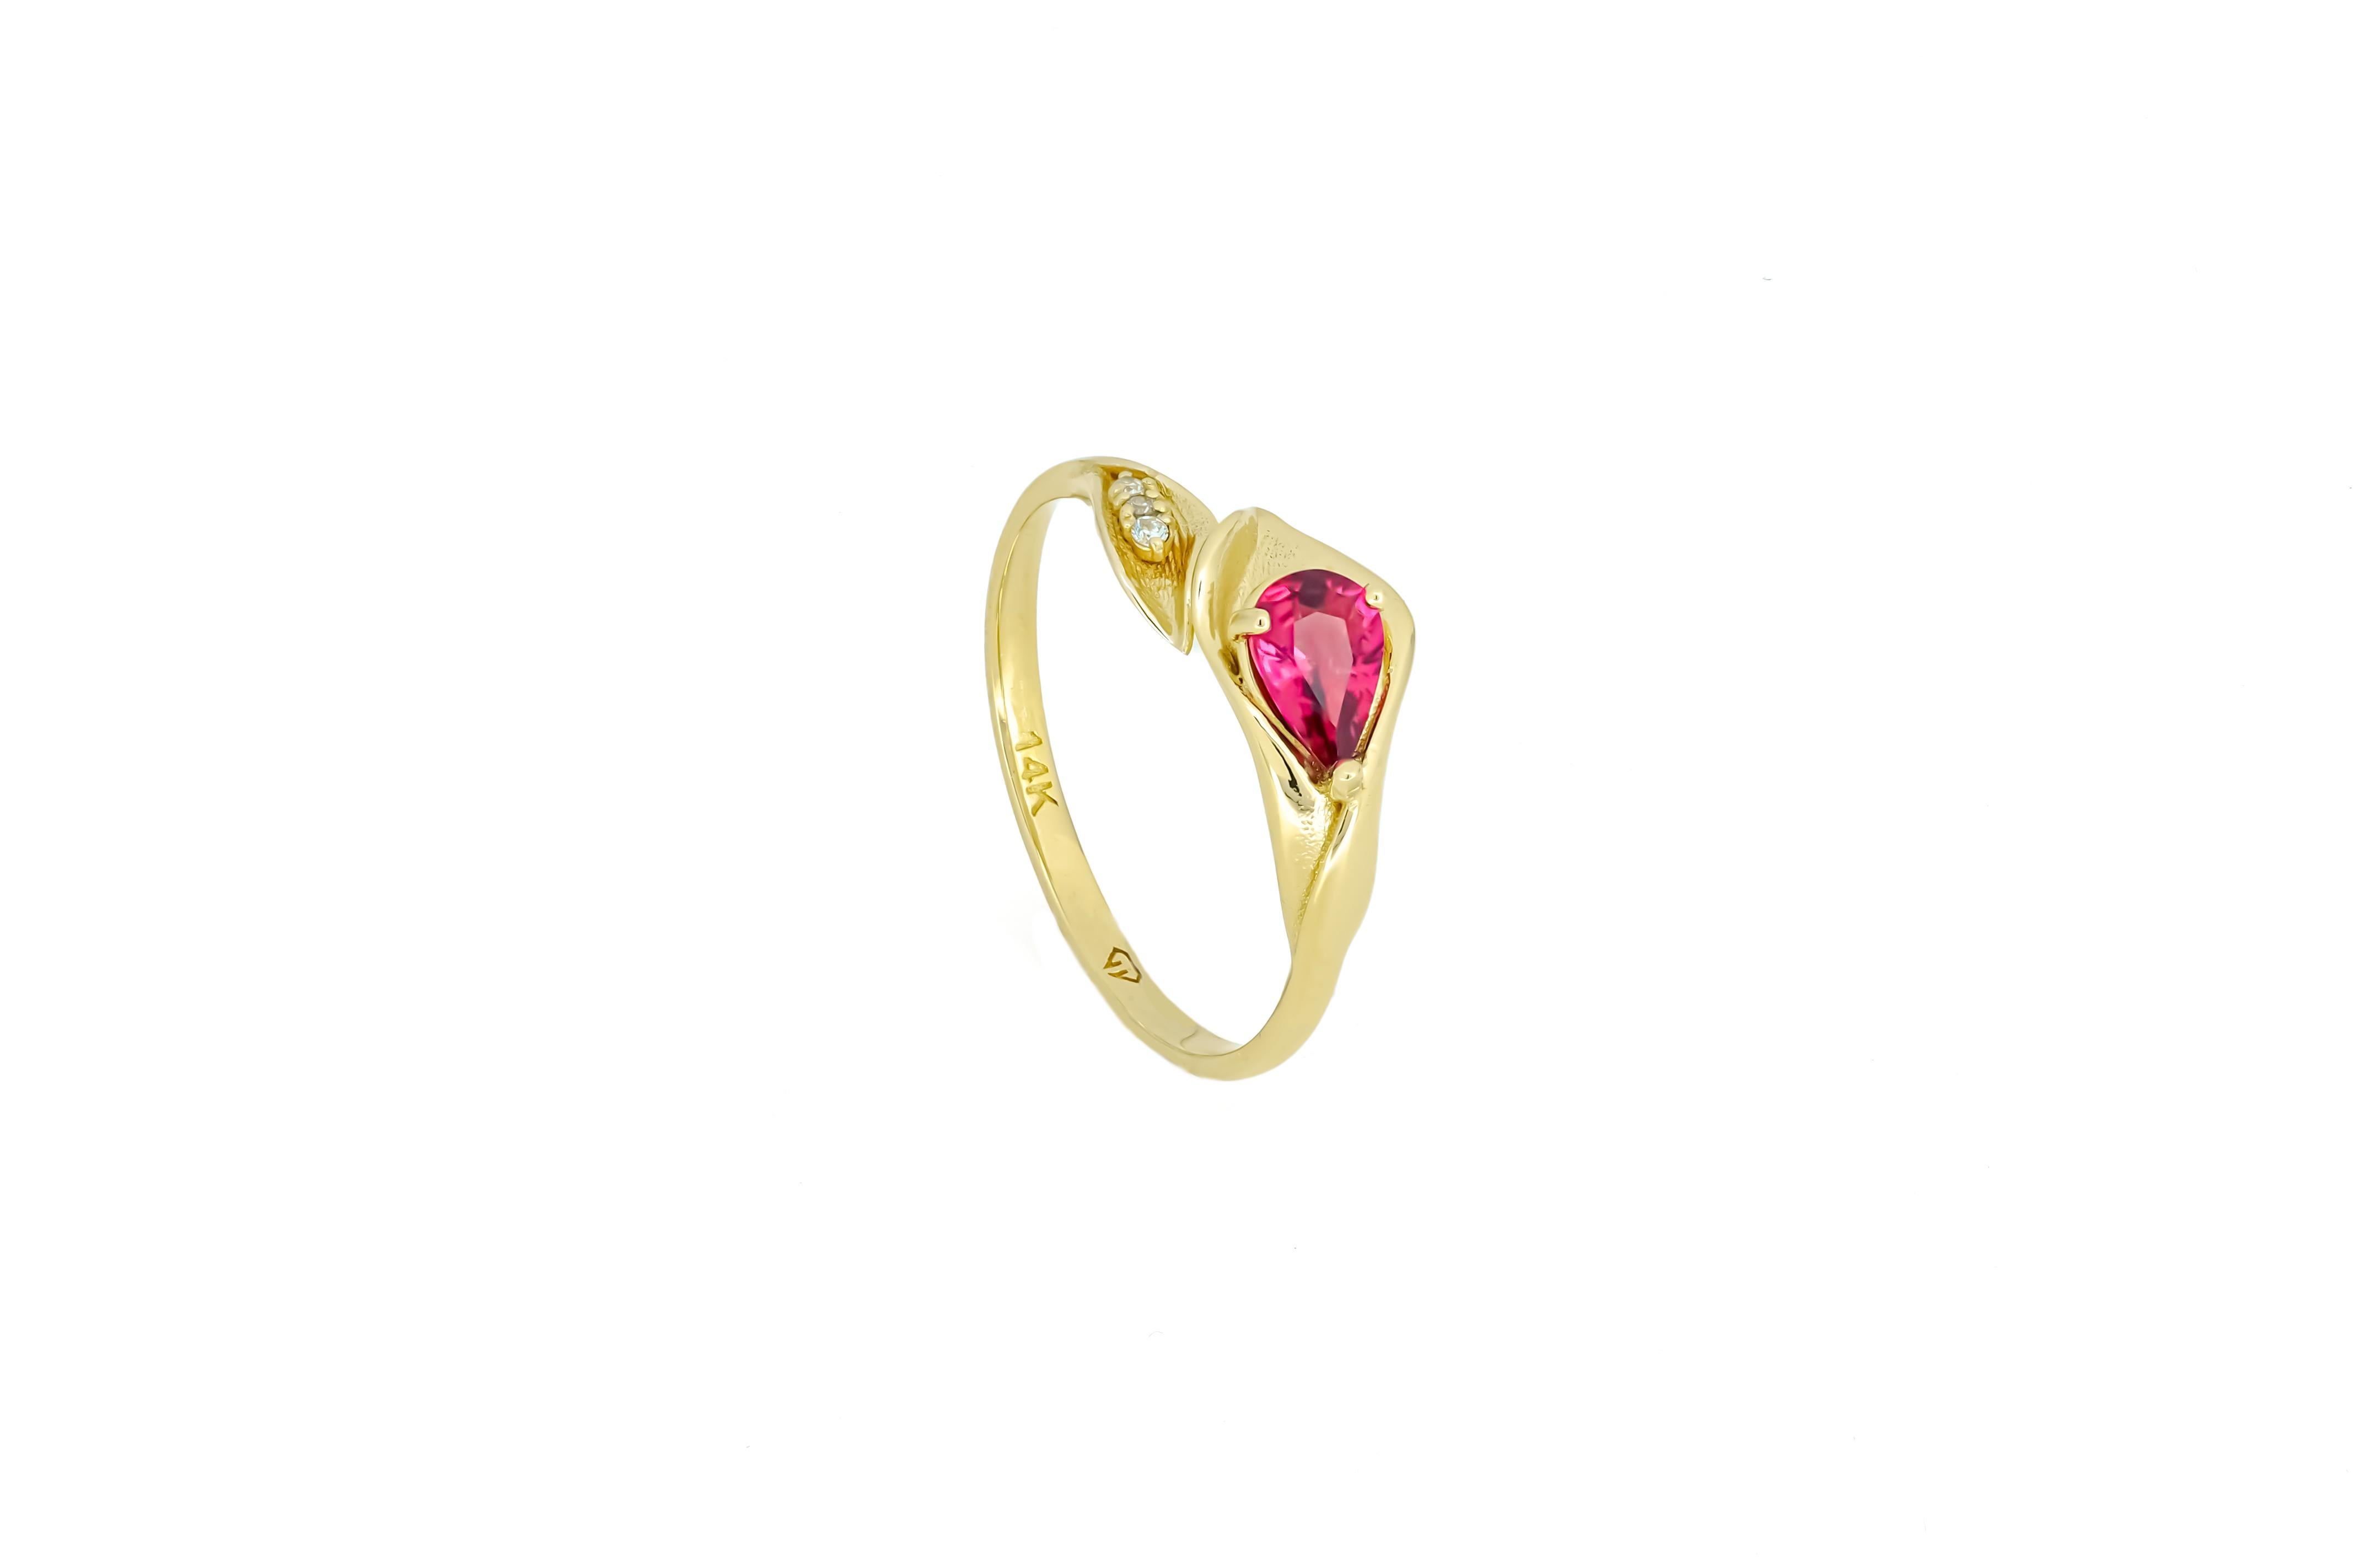 Lily Calla Gold Ring, 14 Karat Gold Ring with Garnet and Diamonds For Sale 6